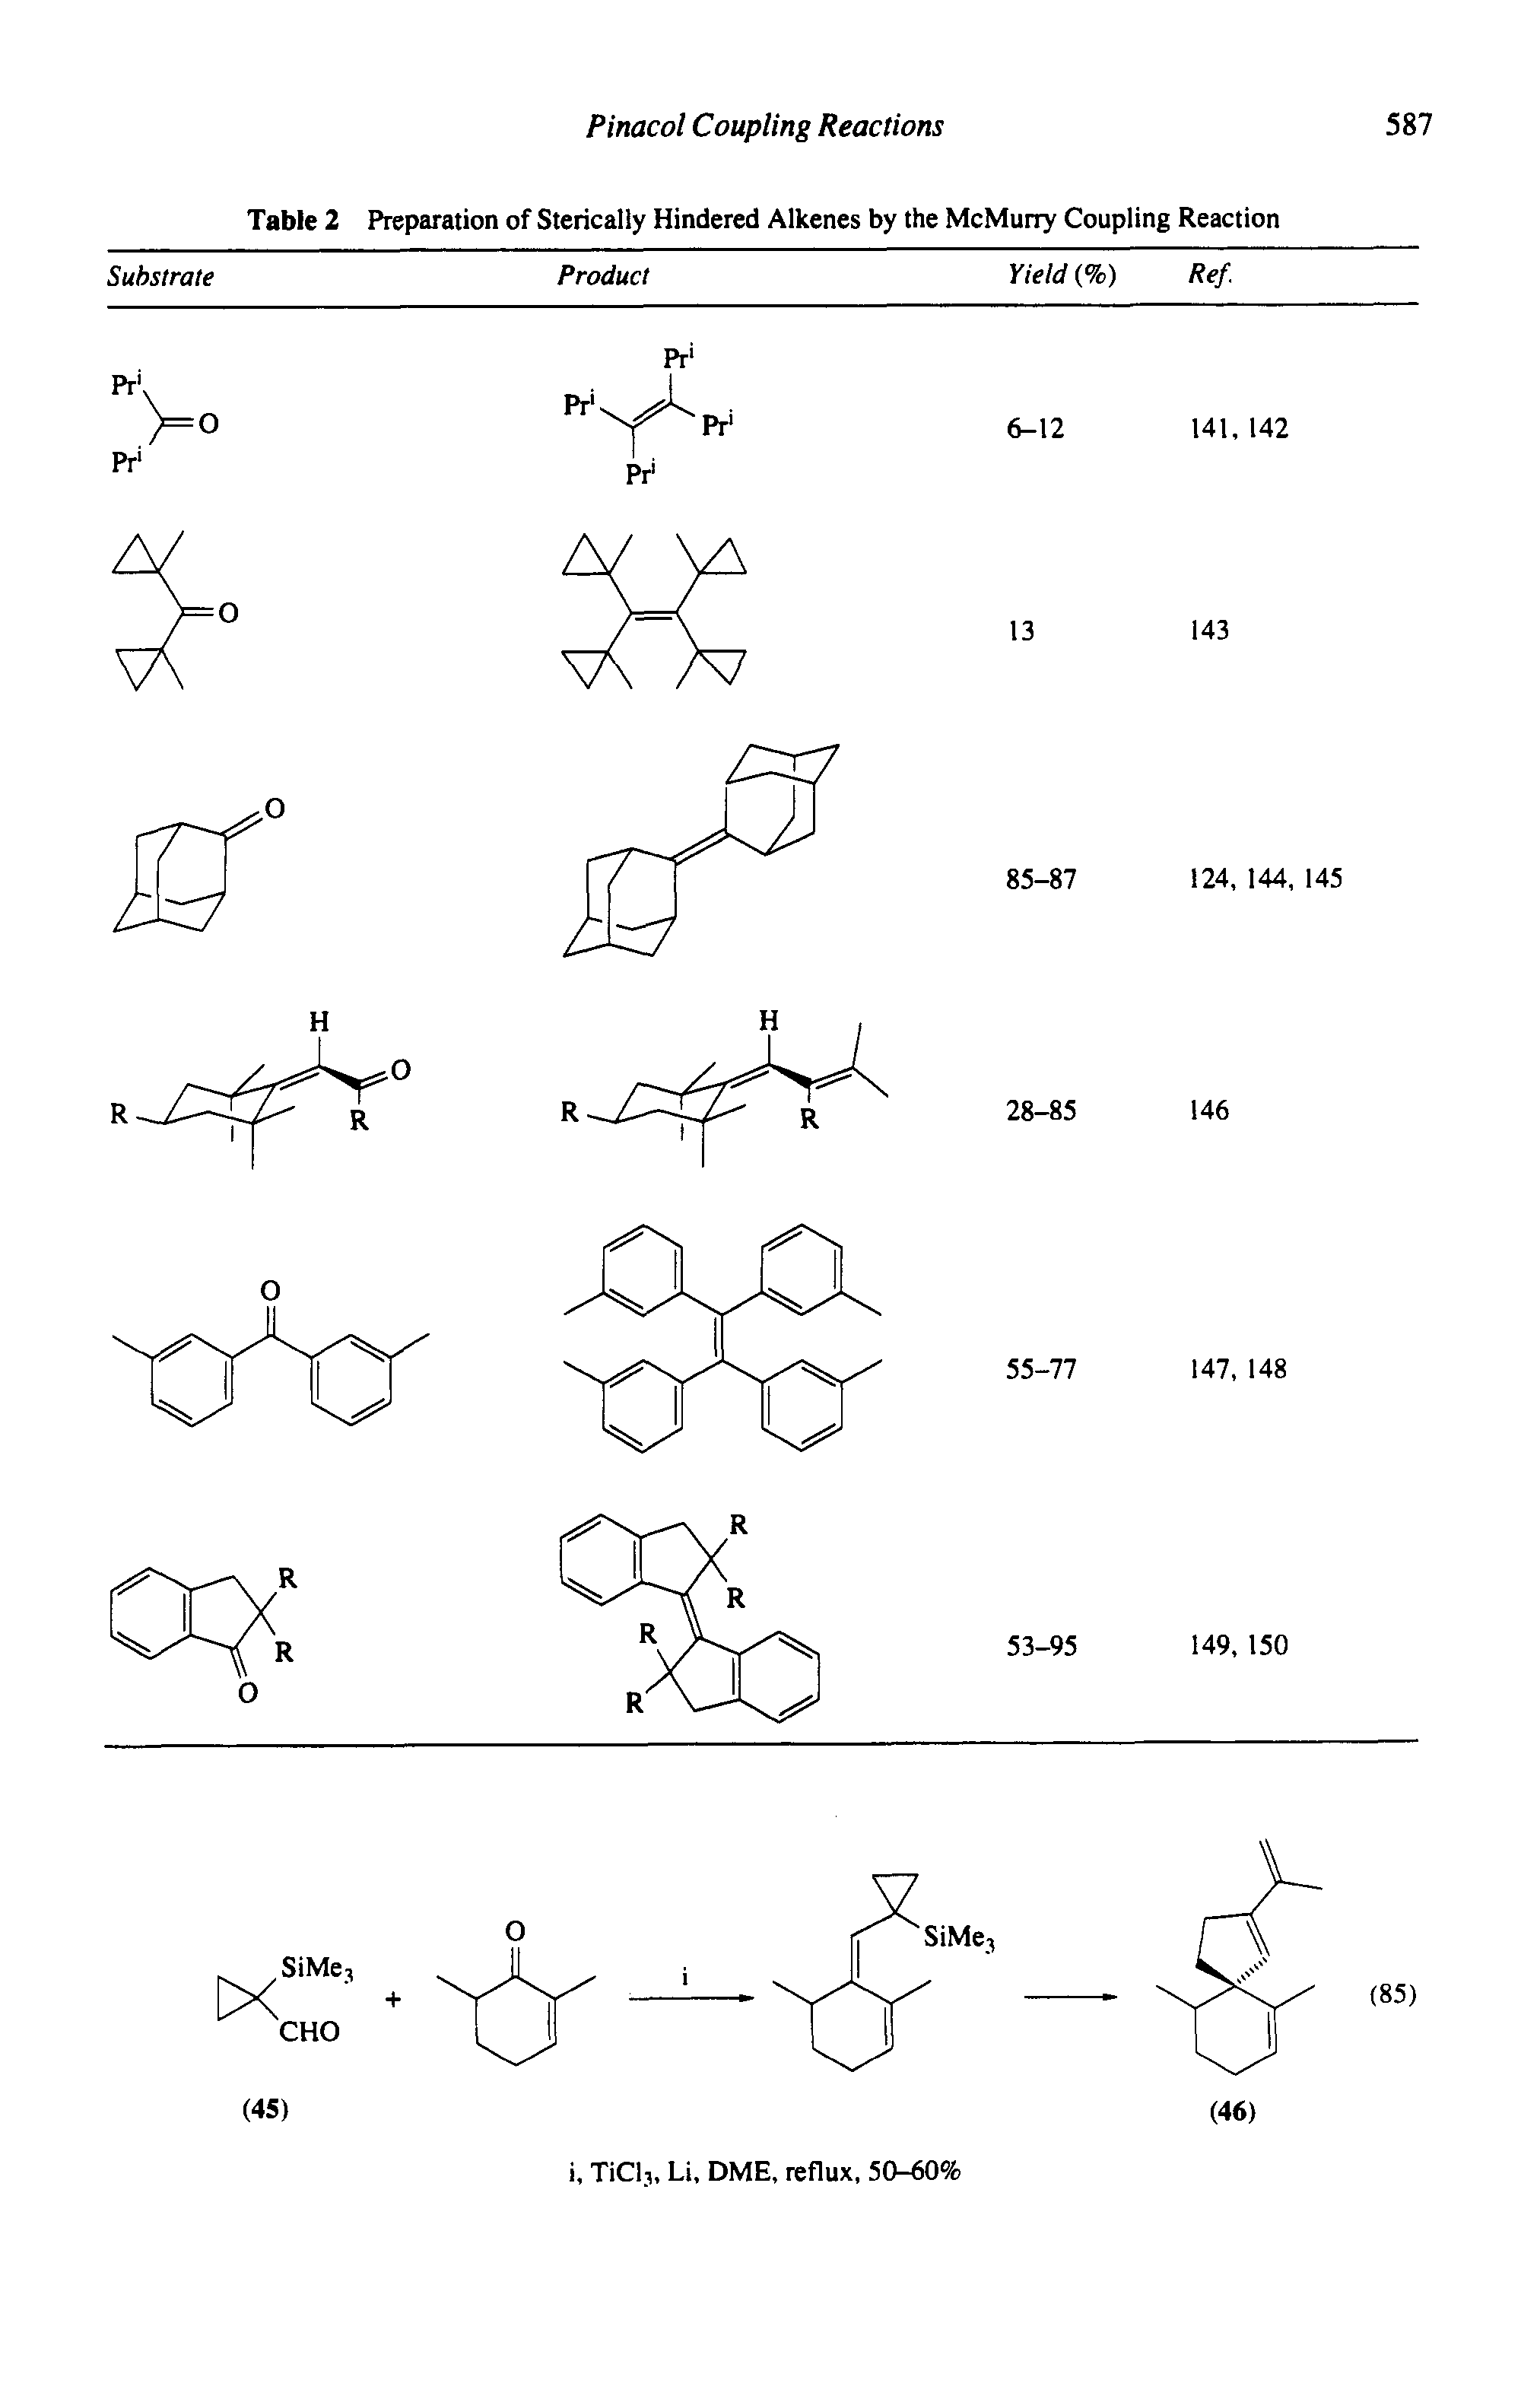 Table 2 Preparation of Sterically Hindered Alkenes by the McMurry Coupling Reaction...